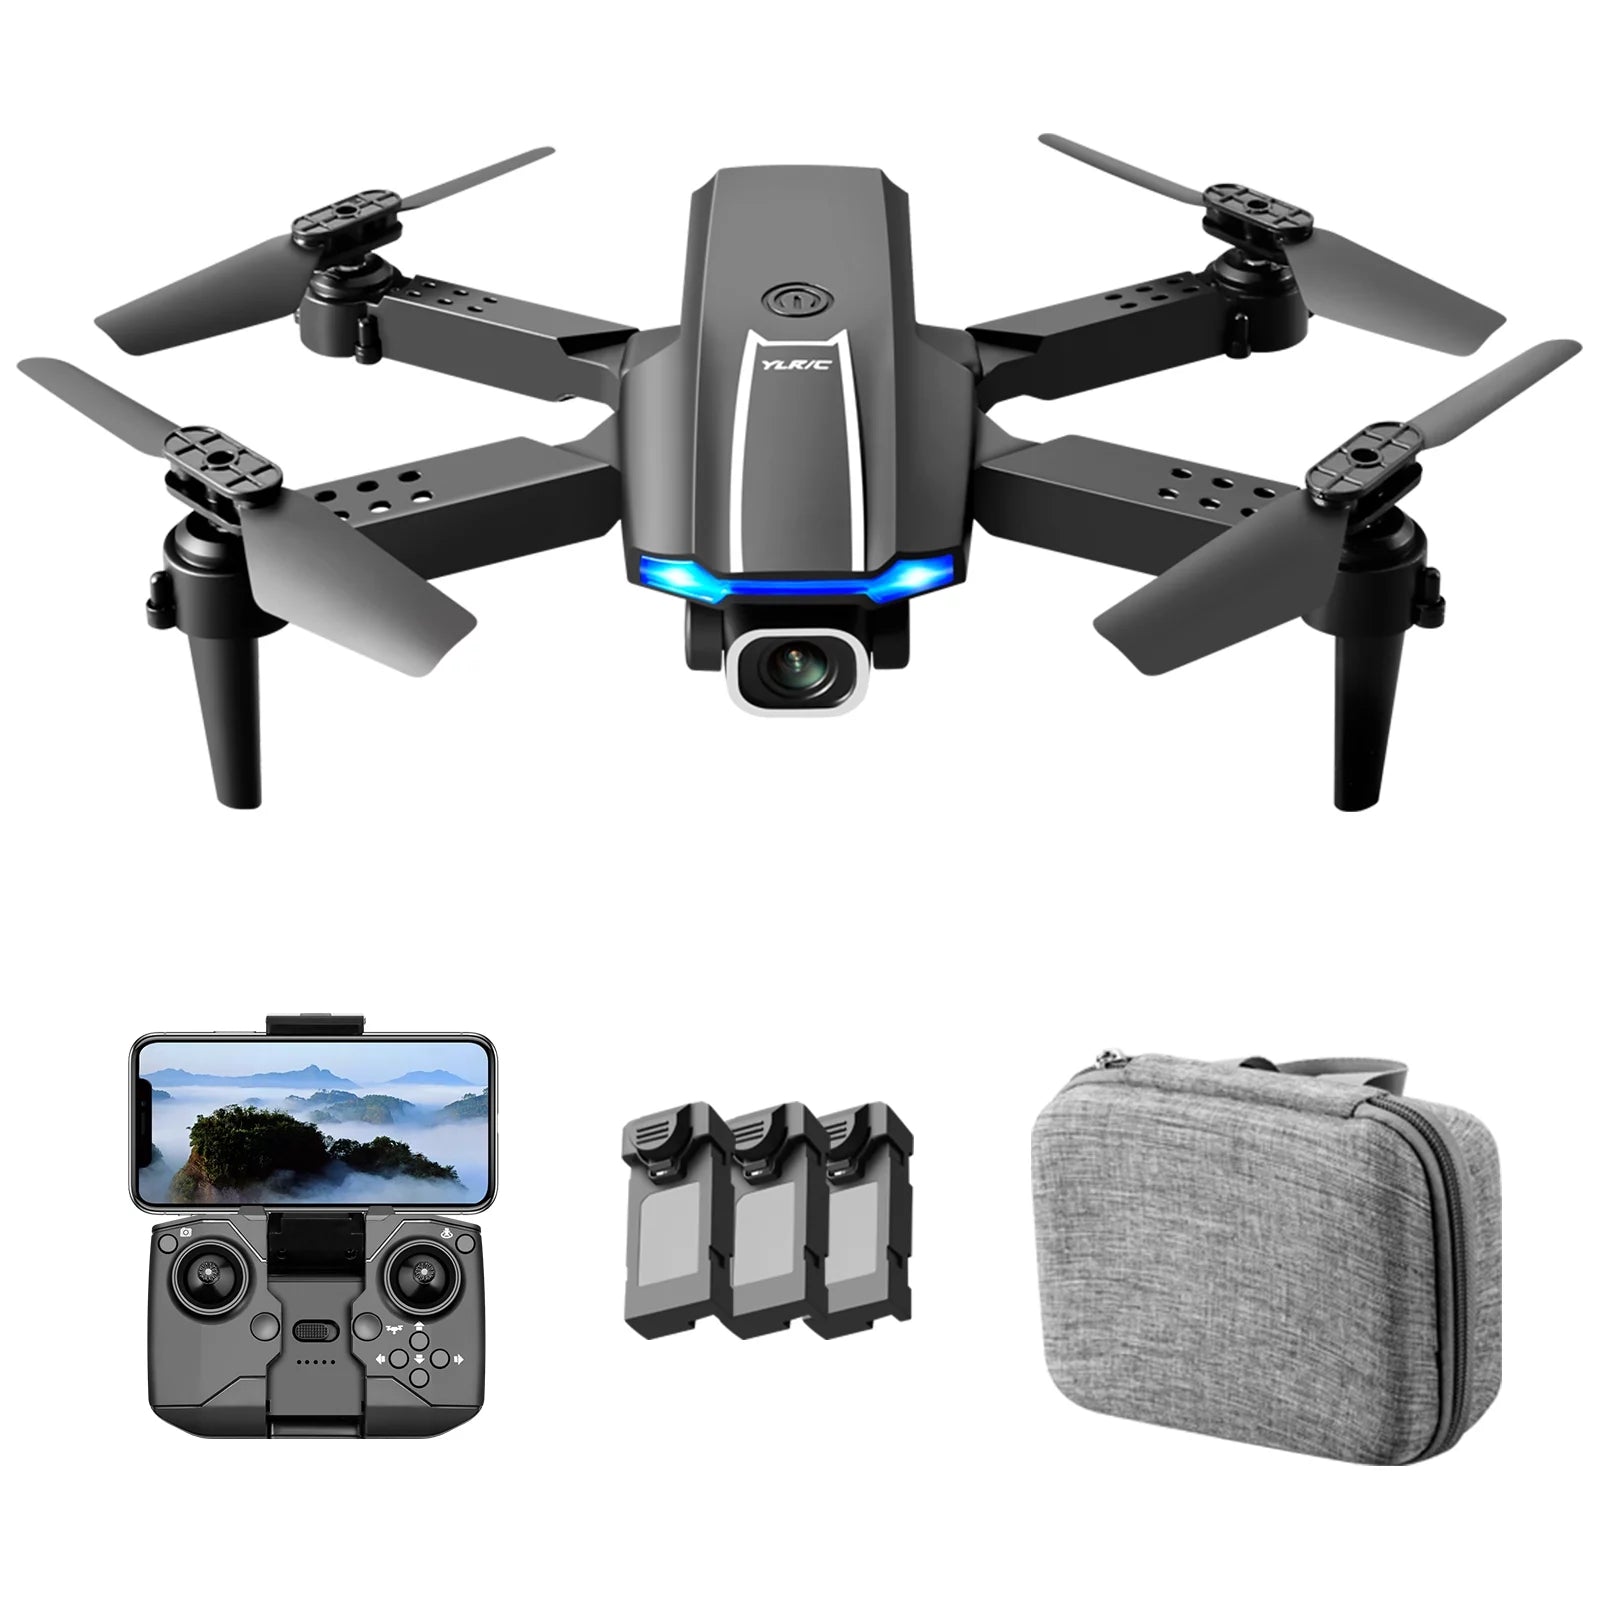 YLRC S65 Drone - 4K HD Camera WiFi Headless Mode 2.4GHz Foldable Quadcopter Toys Real-time transmission Helicopter Toys